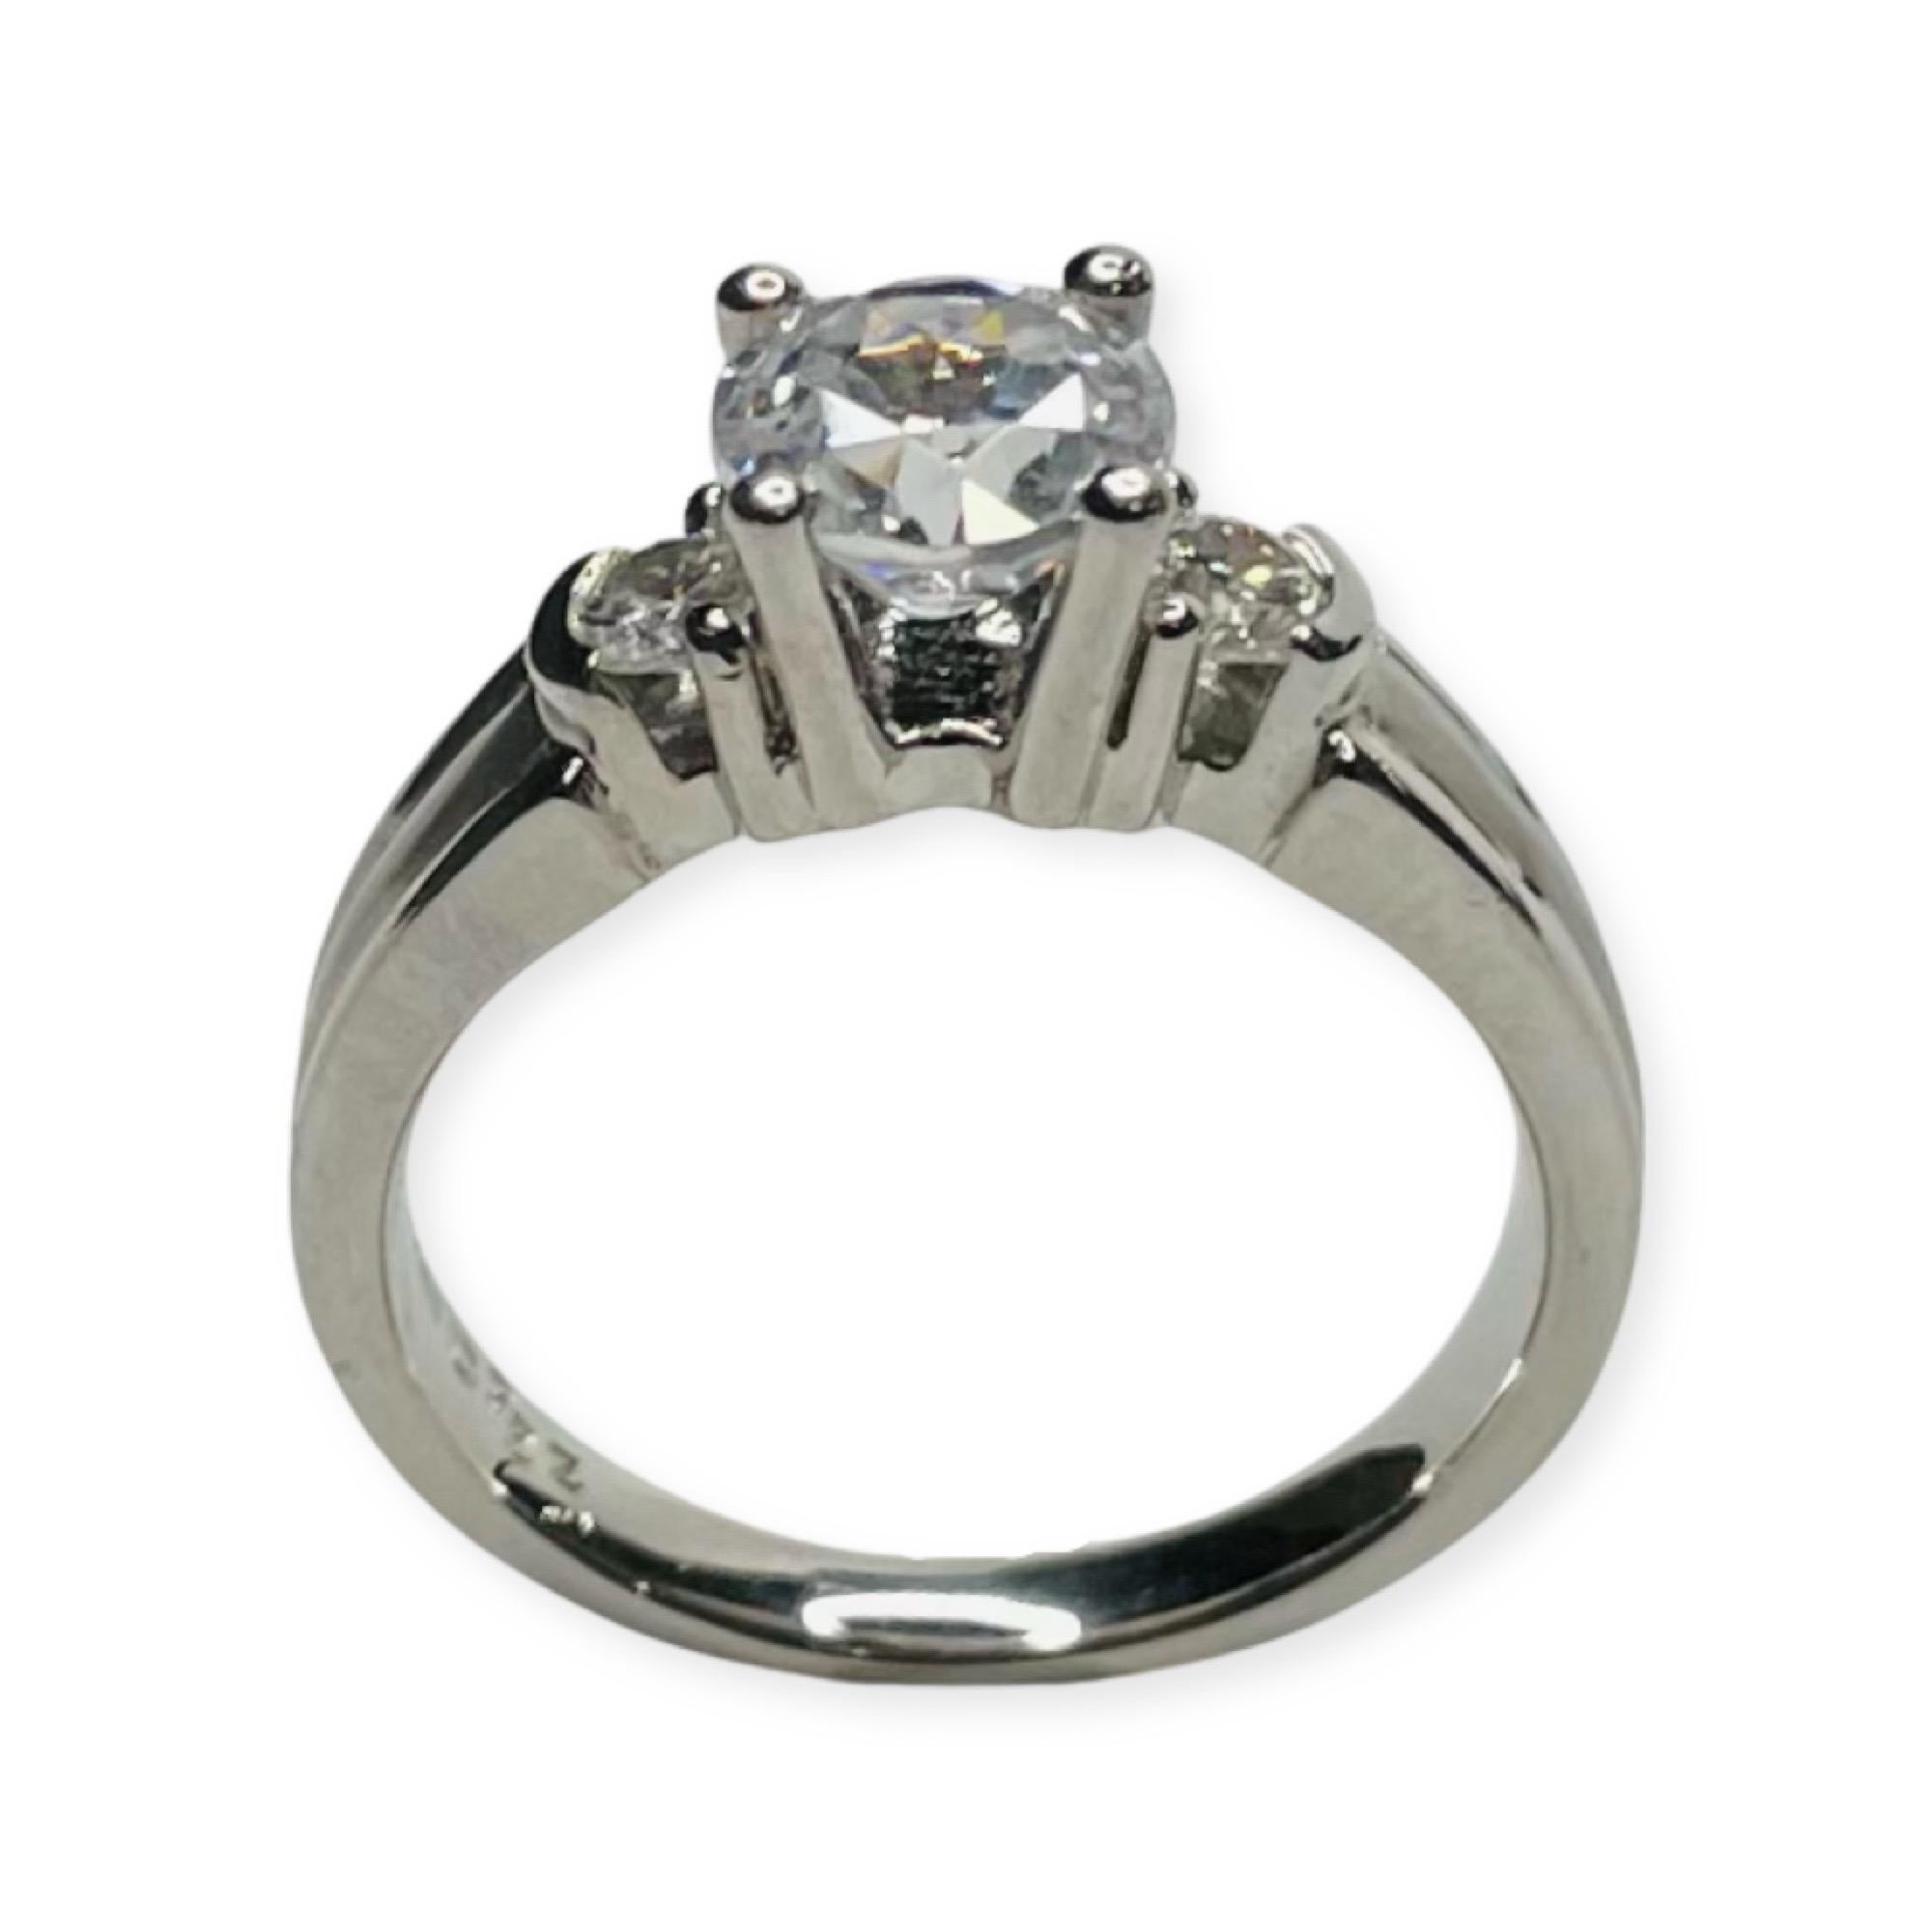 Rudolf Erdel Platinum and Diamond Engagement Ring. The side diamonds are 0.12 carat each for a total diamond weight of 0.24 carats. The diamonds are VS clarity and G Color. They are 2 prong and half bezel set. The CZ in the center is 6.5 mm which is